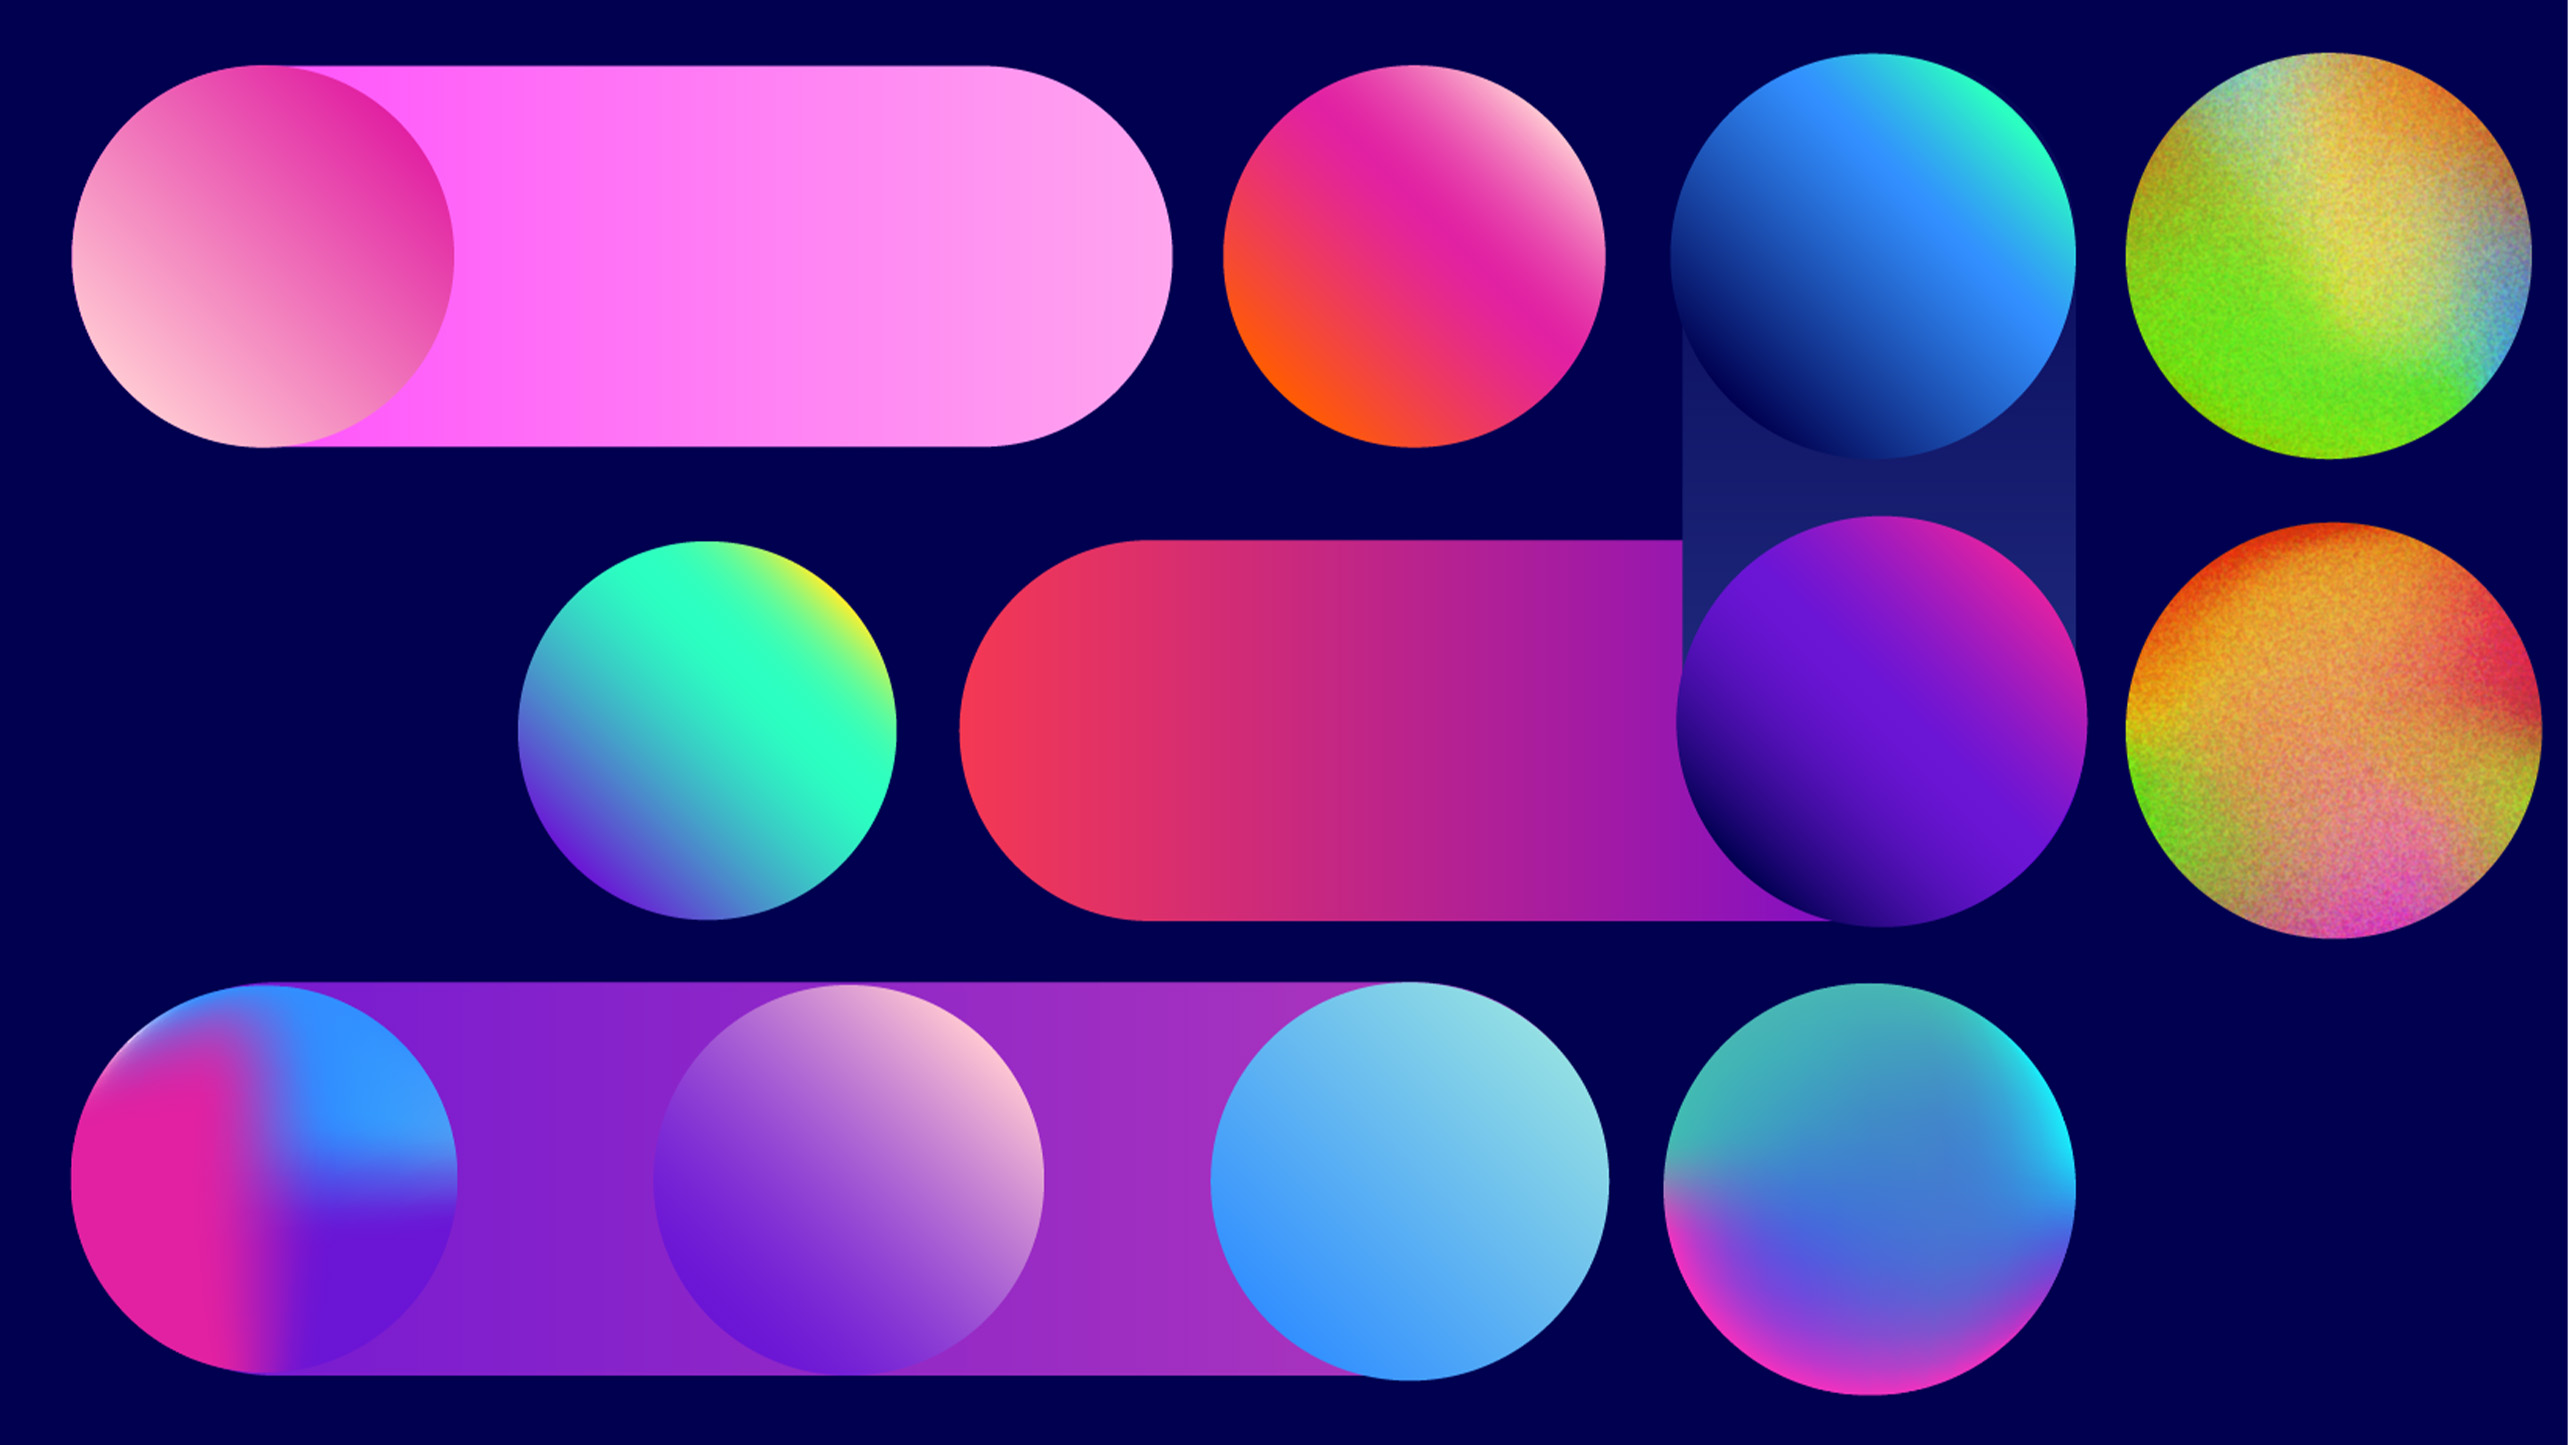 Multicoloured spheres on a navy background